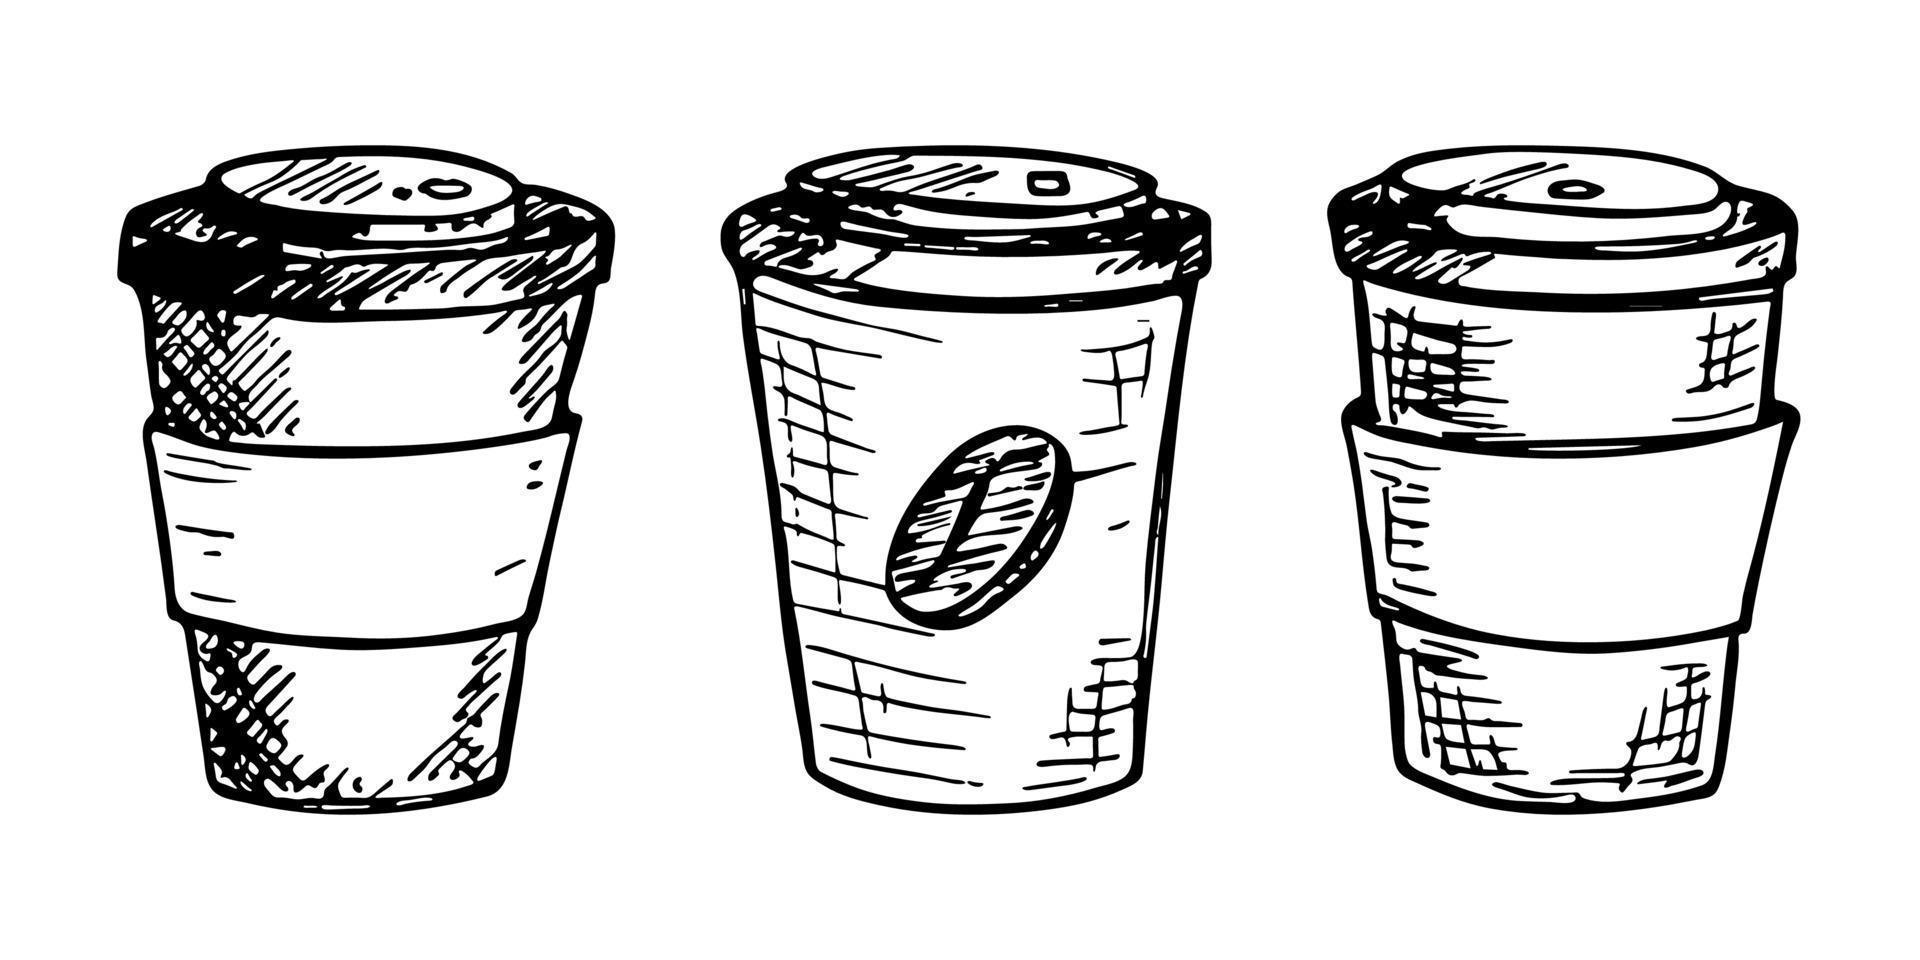 Cute cup of tea or coffee illustration. Simple cup clipart. Cozy home doodle set vector